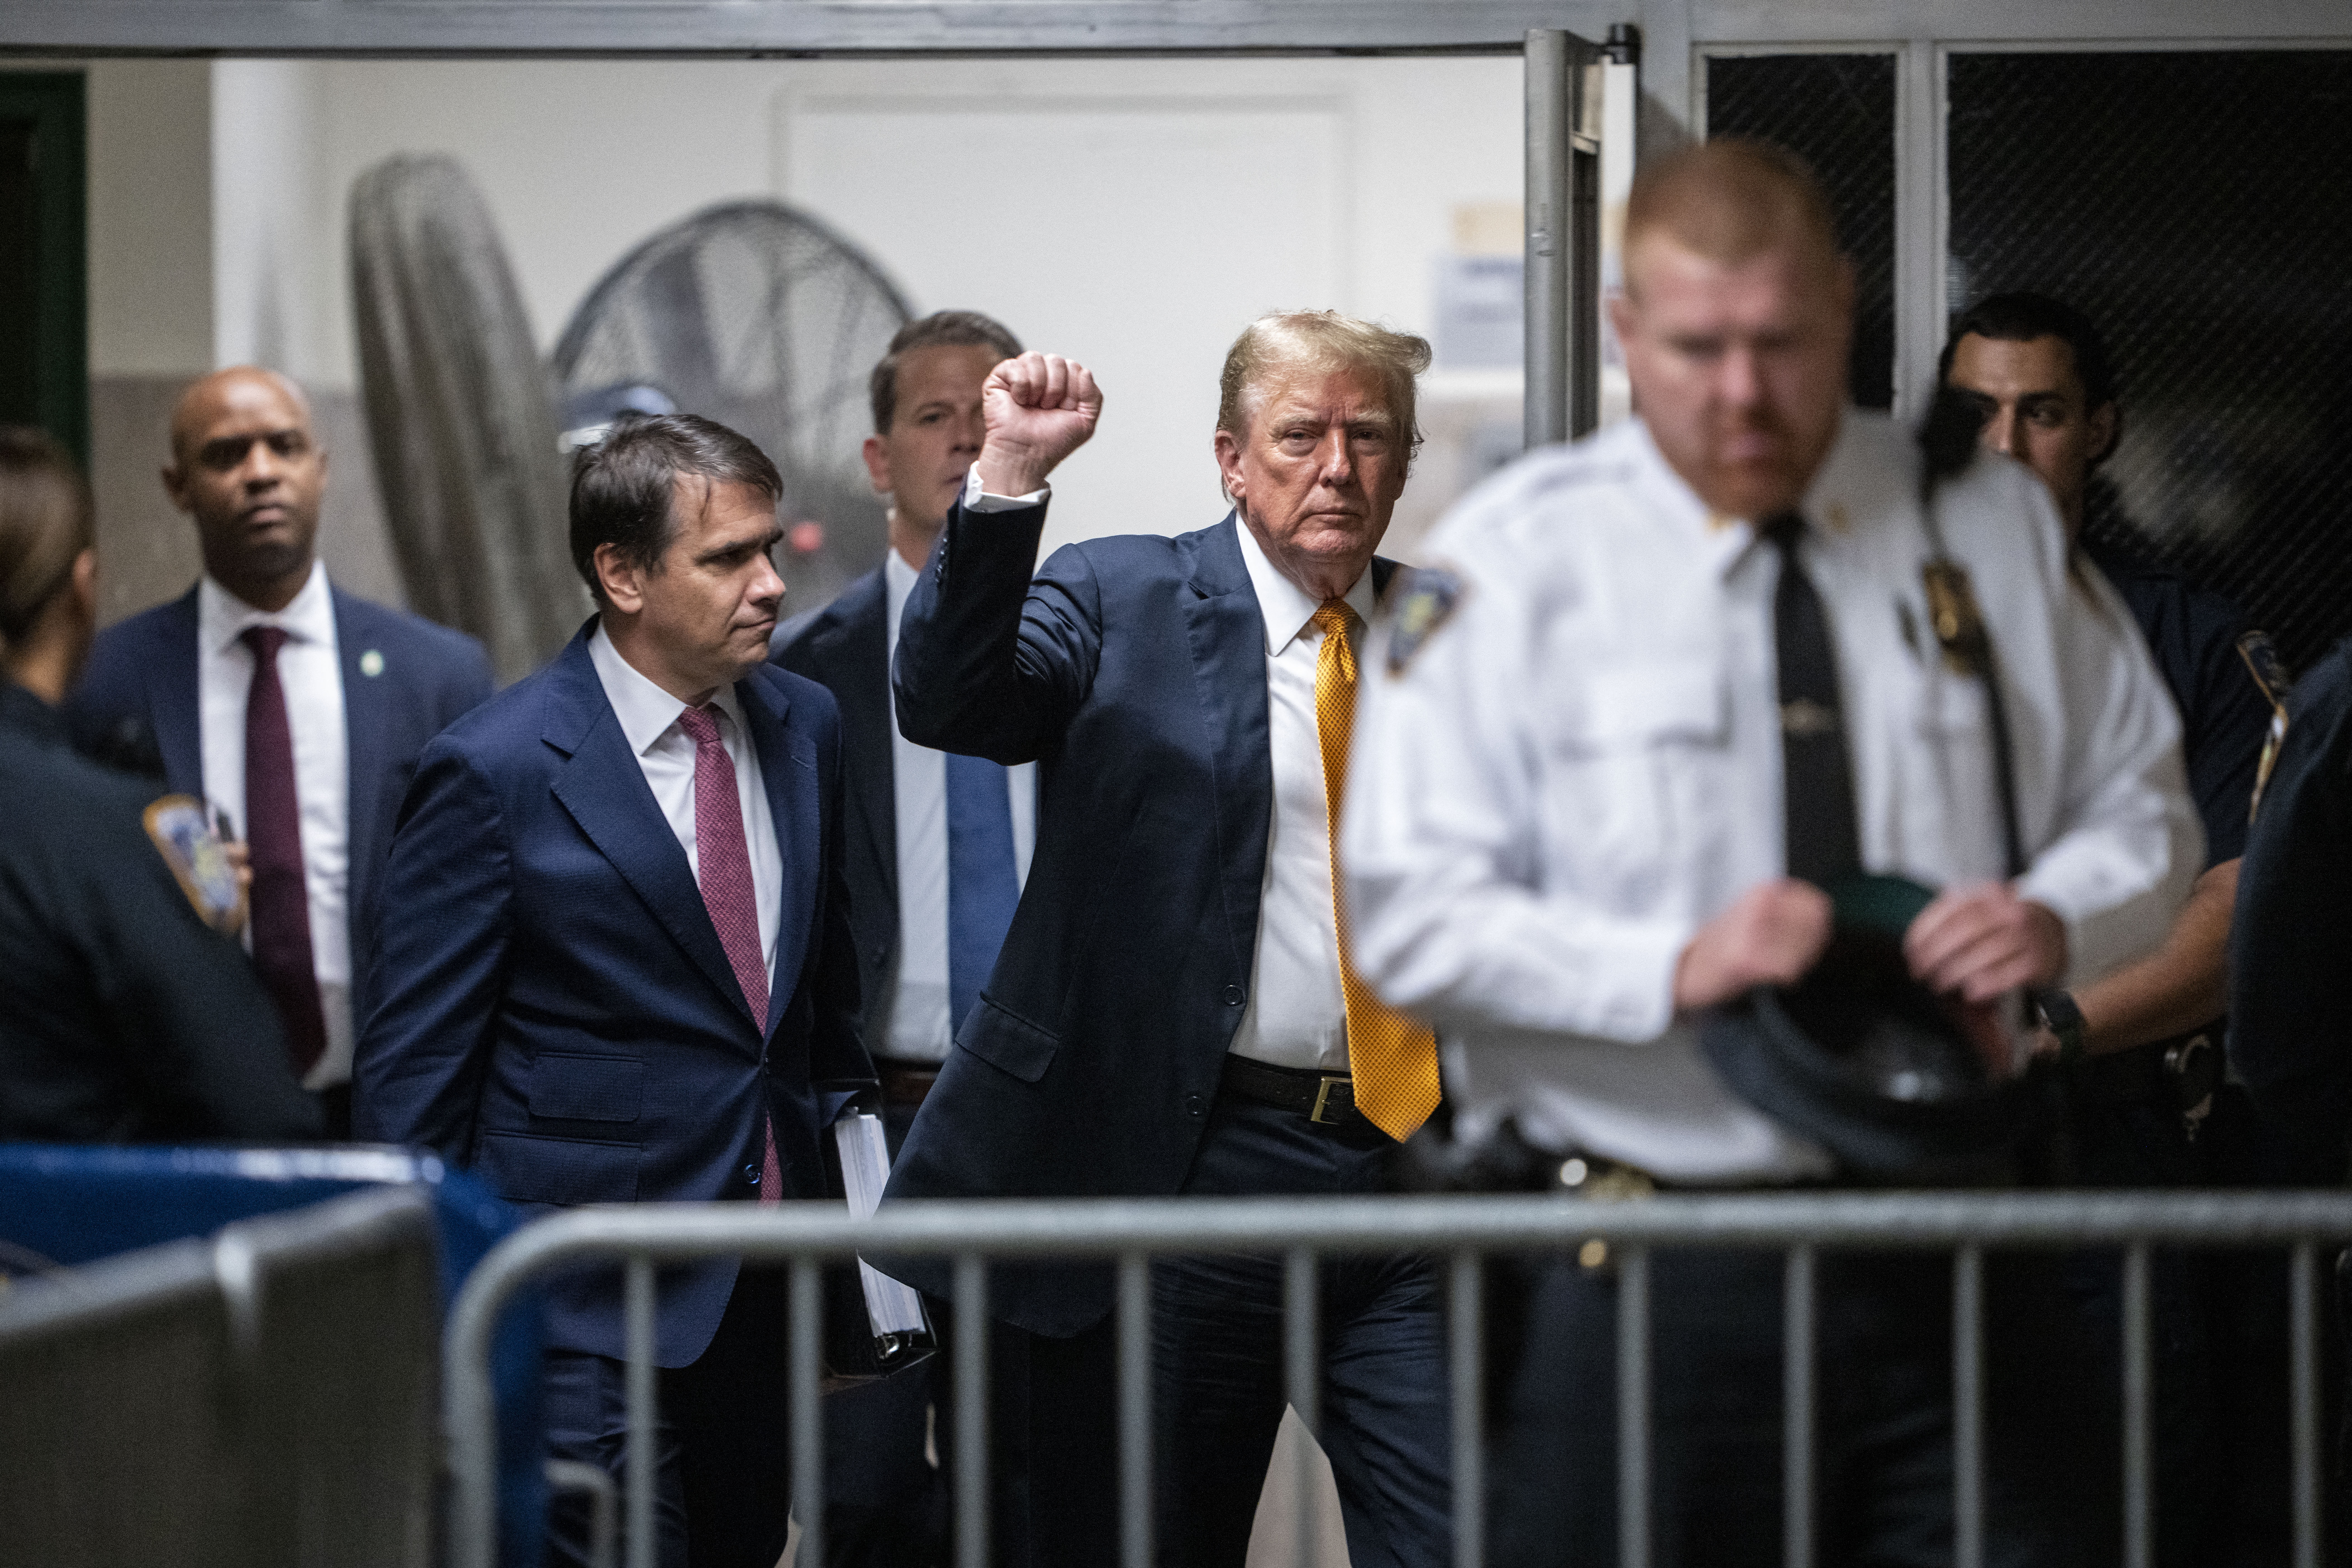 Former US President and Republican presidential candidate Donald Trump arrives for his criminal trial at Manhattan Criminal Court in New York City, on May 29, 2024. Jurors in Trump's hush money trial begin deliberating today on whether to return the first criminal conviction of a former president -- a momentous decision that could upend the November presidential election. (Photo by Doug Mills / POOL / AFP) (Photo by DOUG MILLS/POOL/AFP via Getty Images)